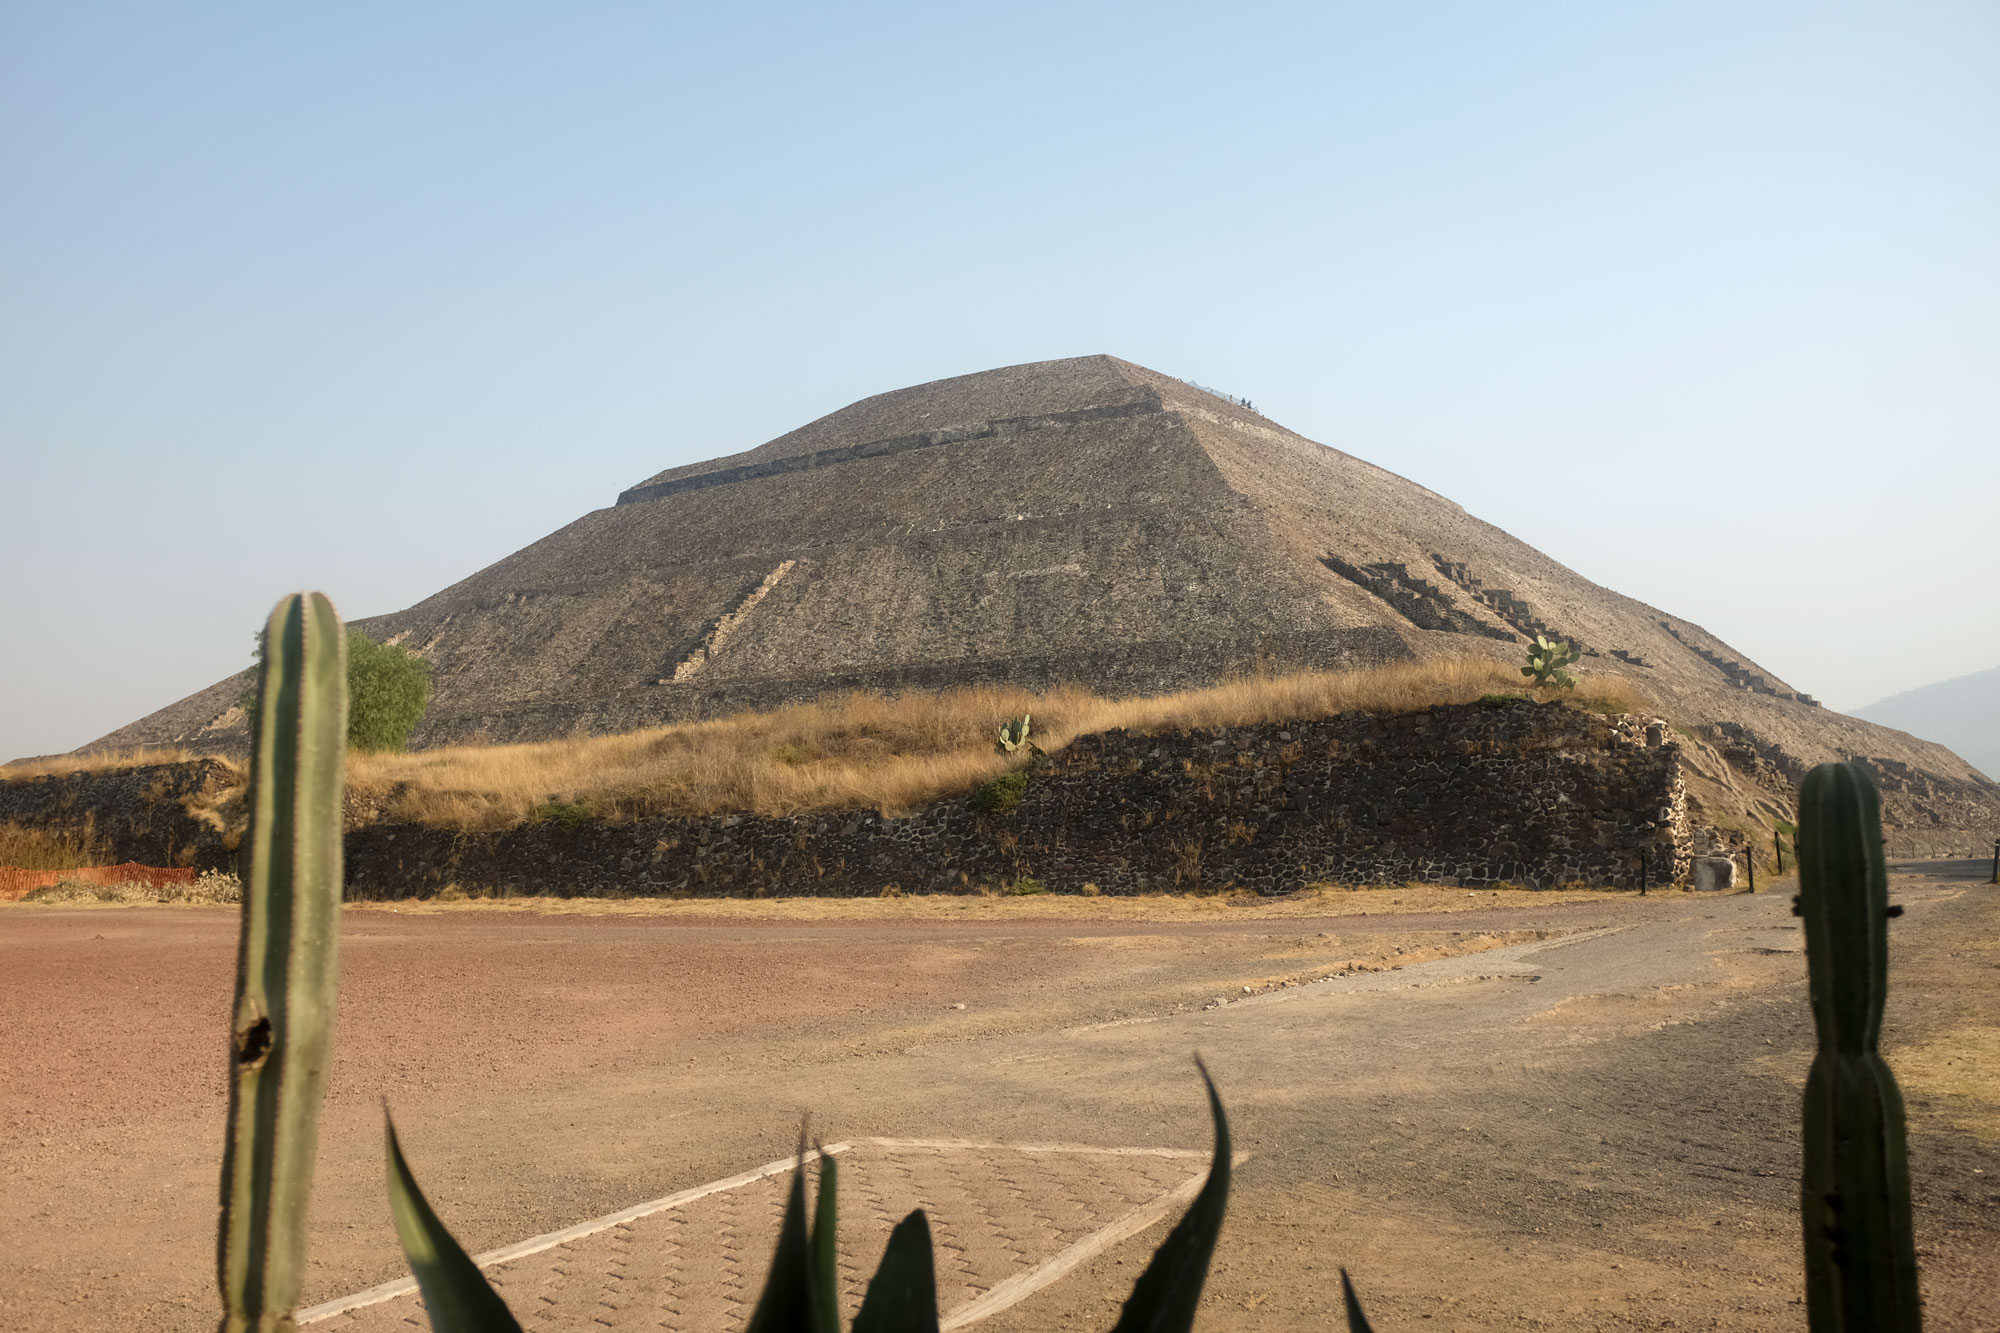 View of Pyramid of the Sun at Teotihuacan